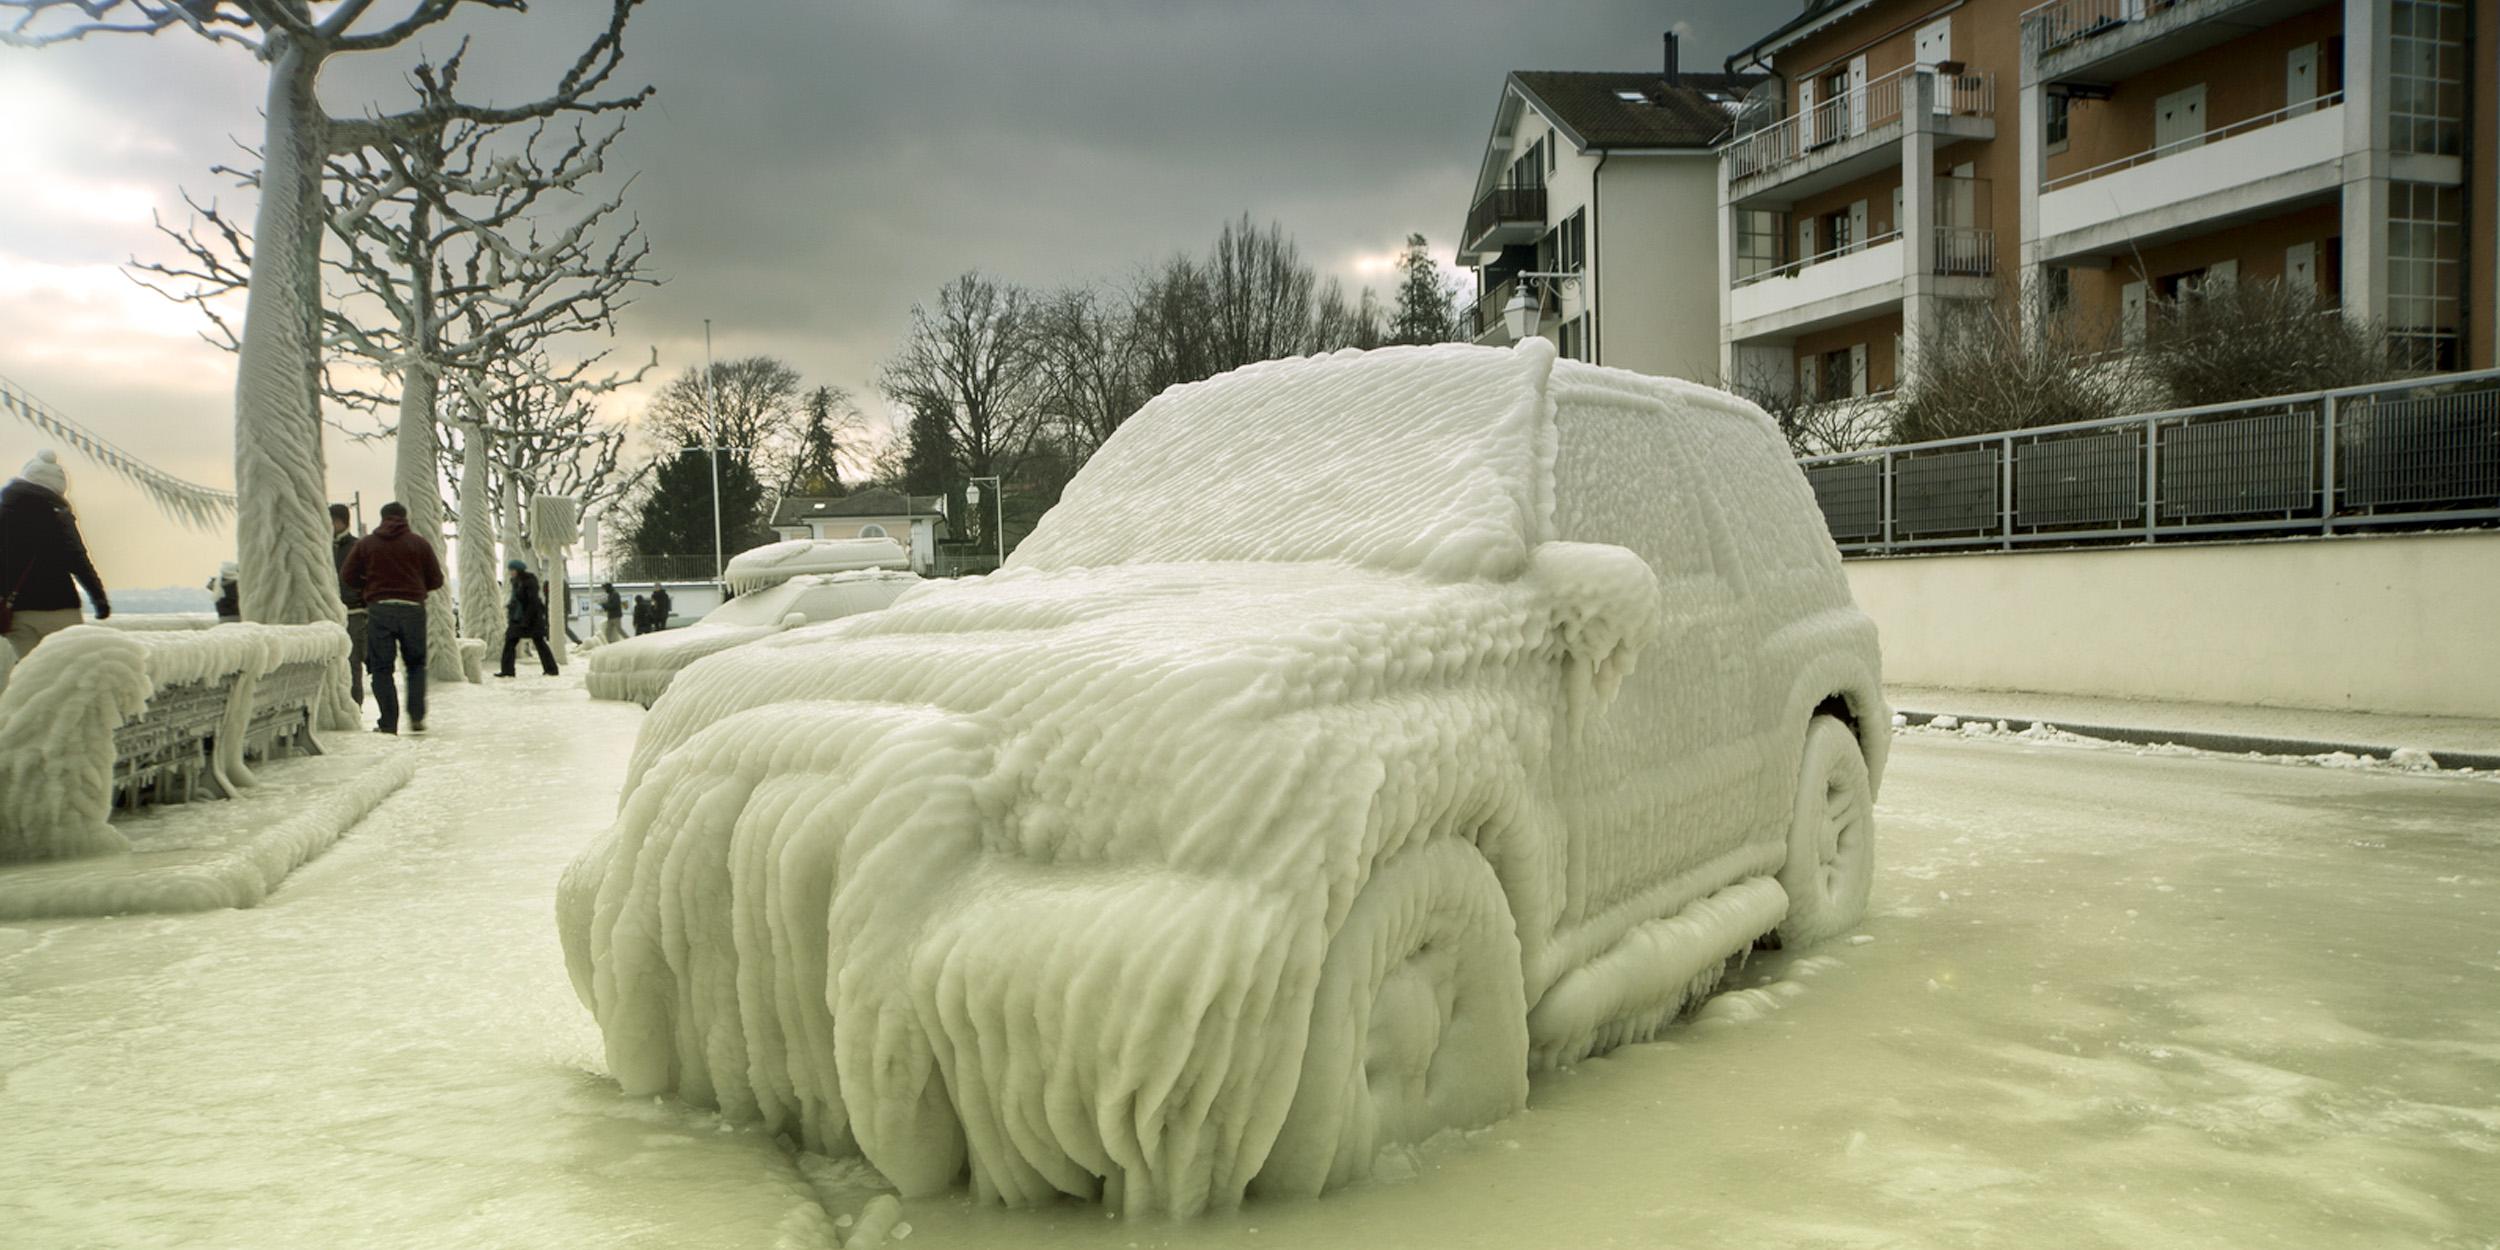 Frozen car. How to cope?